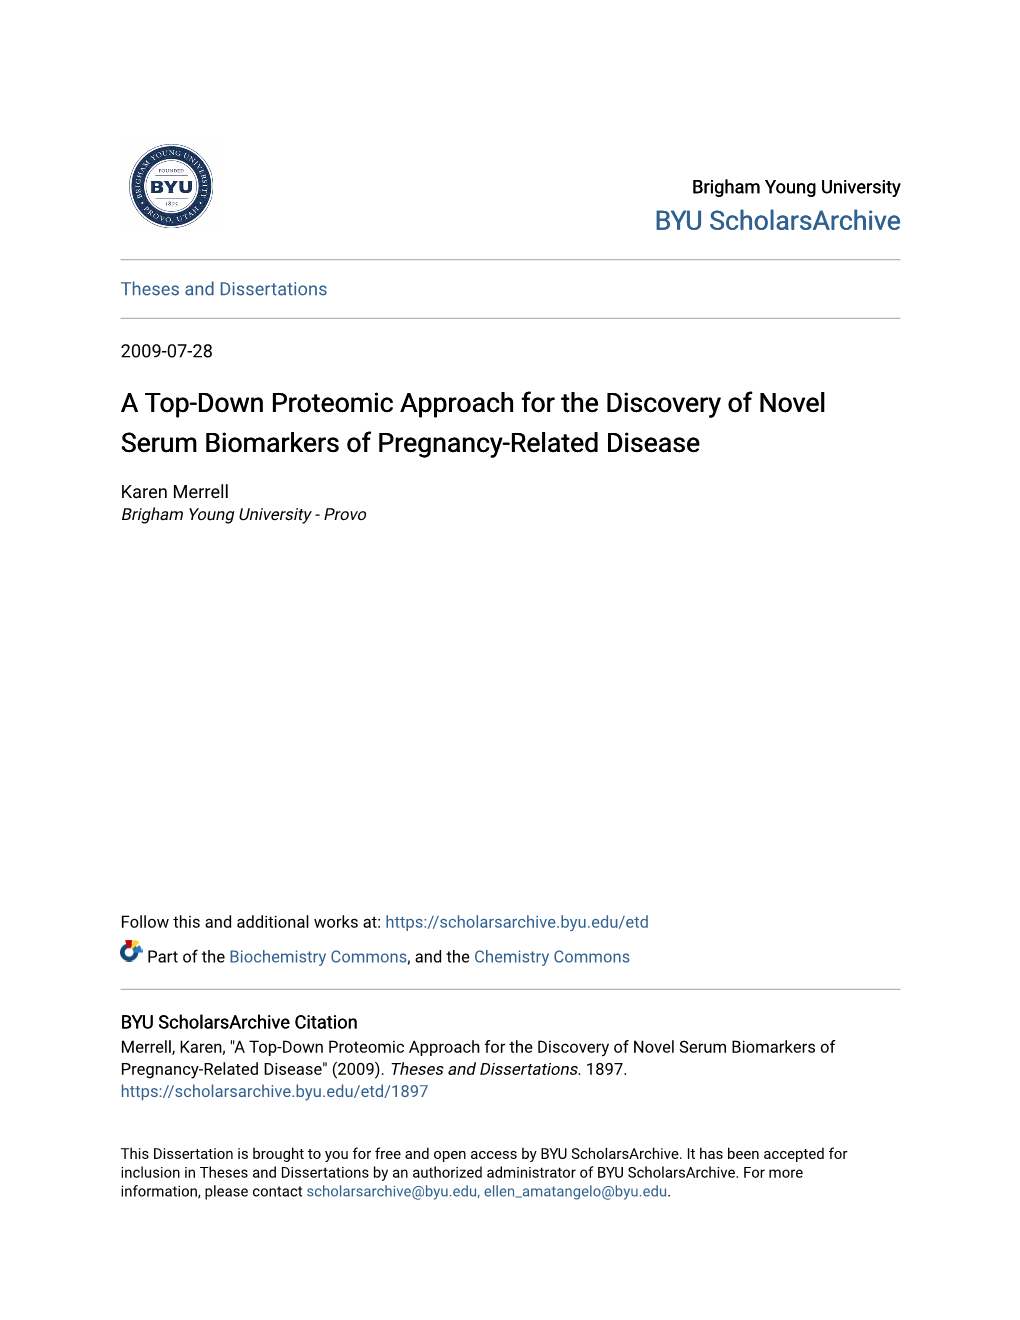 A Top-Down Proteomic Approach for the Discovery of Novel Serum Biomarkers of Pregnancy-Related Disease